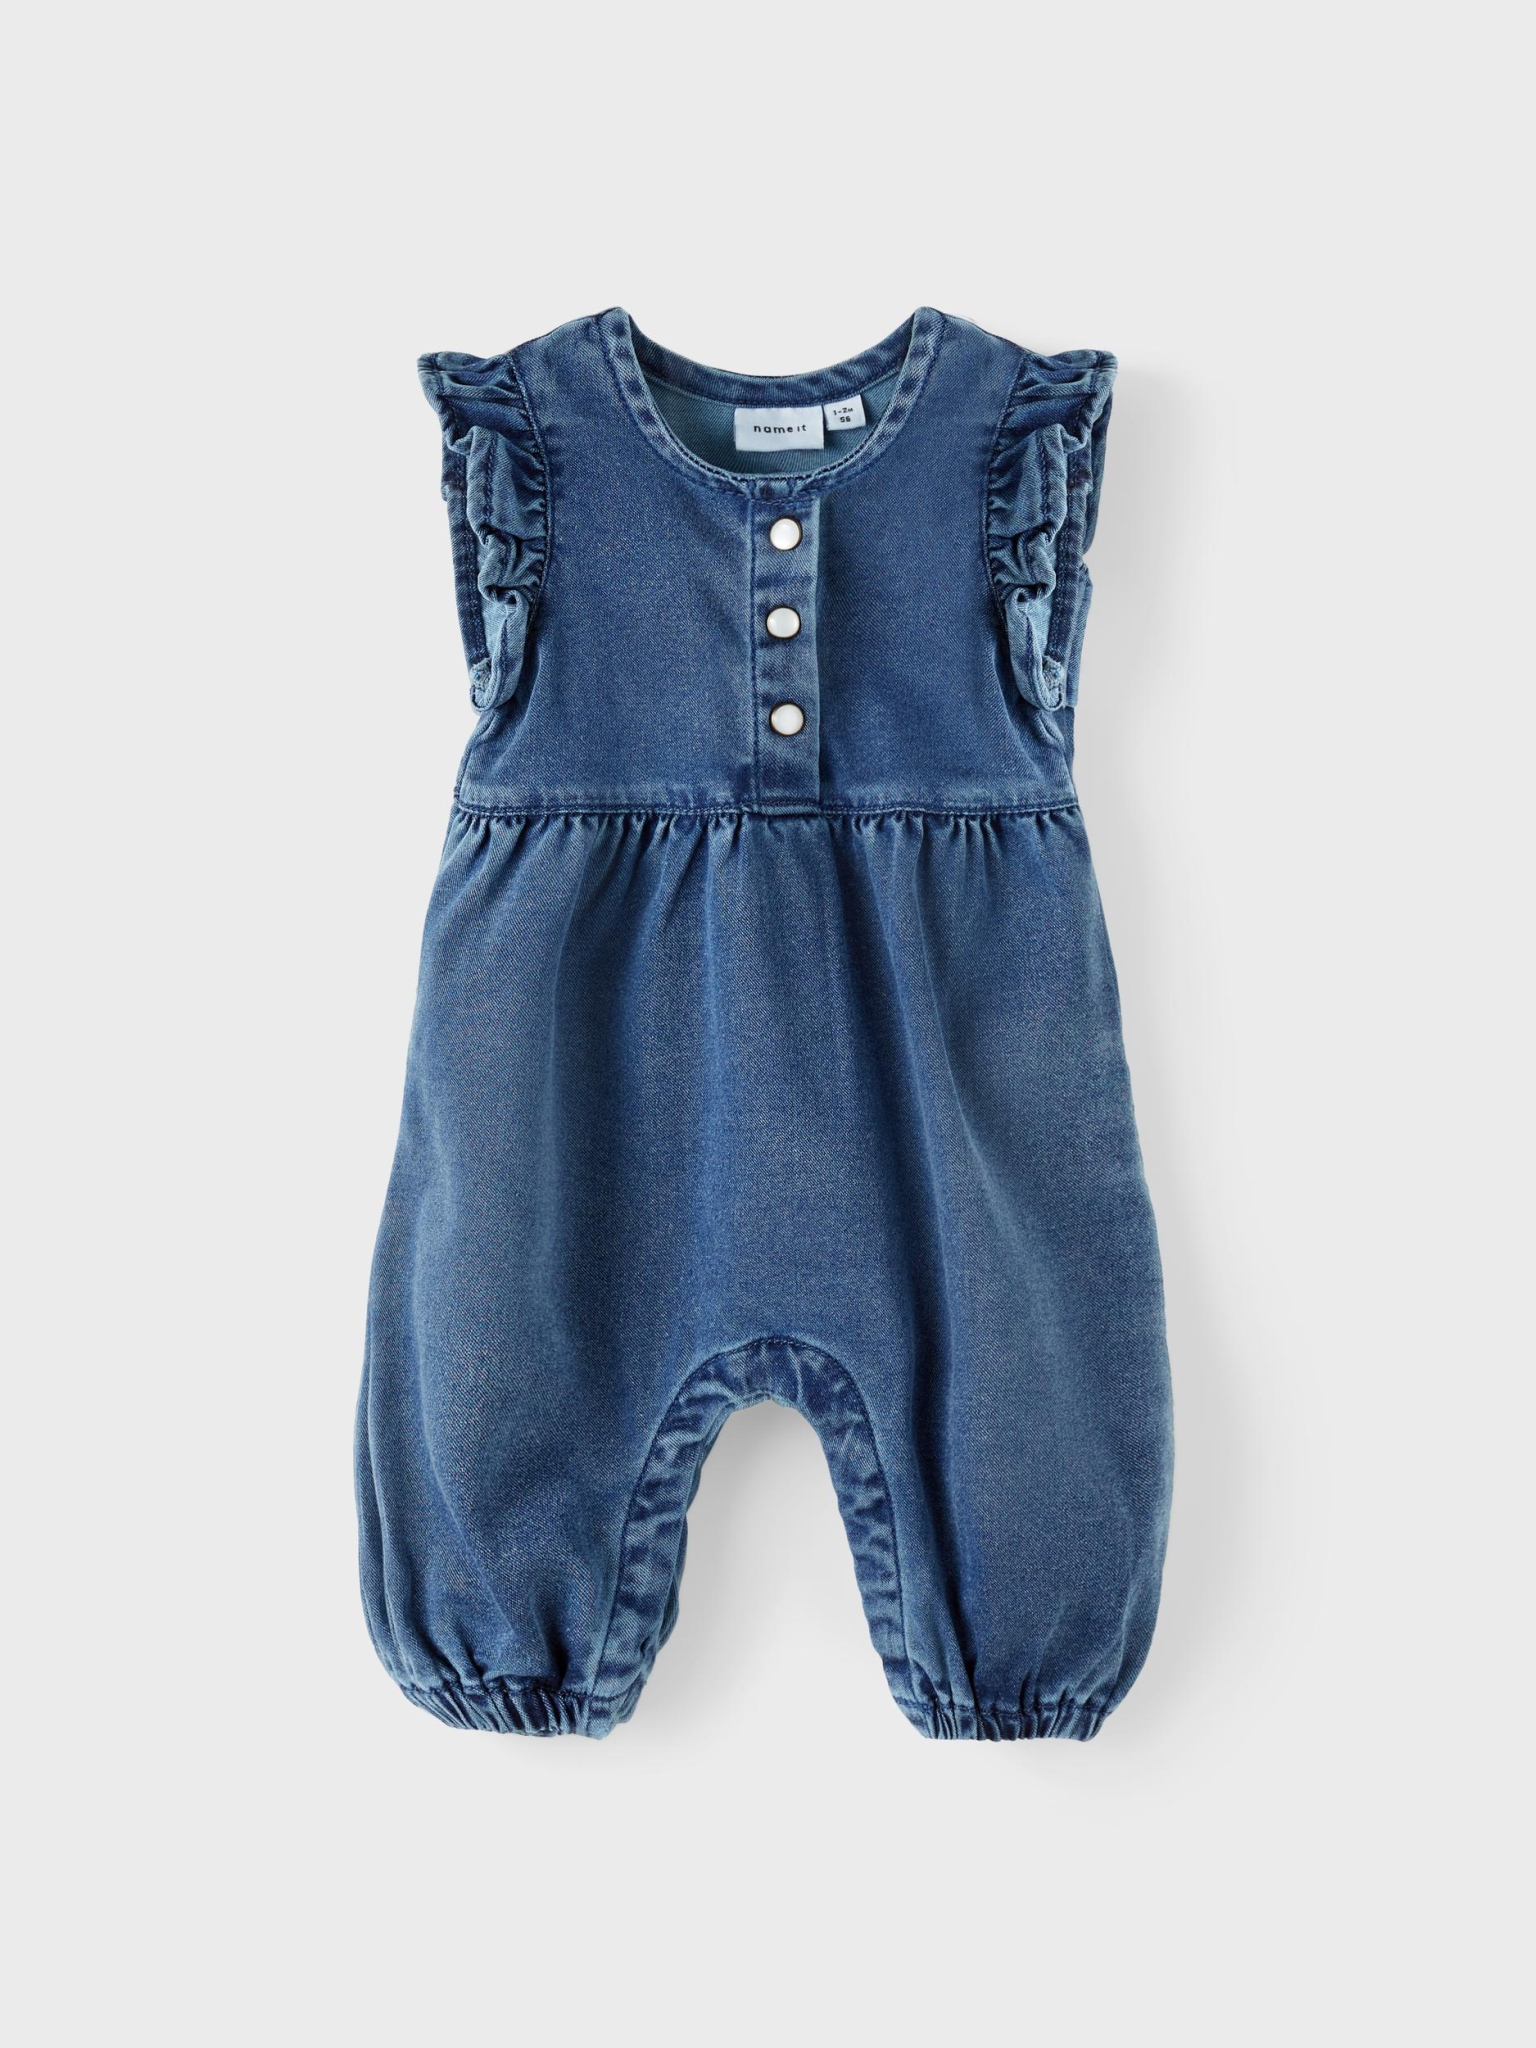 NAME IT Jeans Overall mit Rüschendetails 10664279